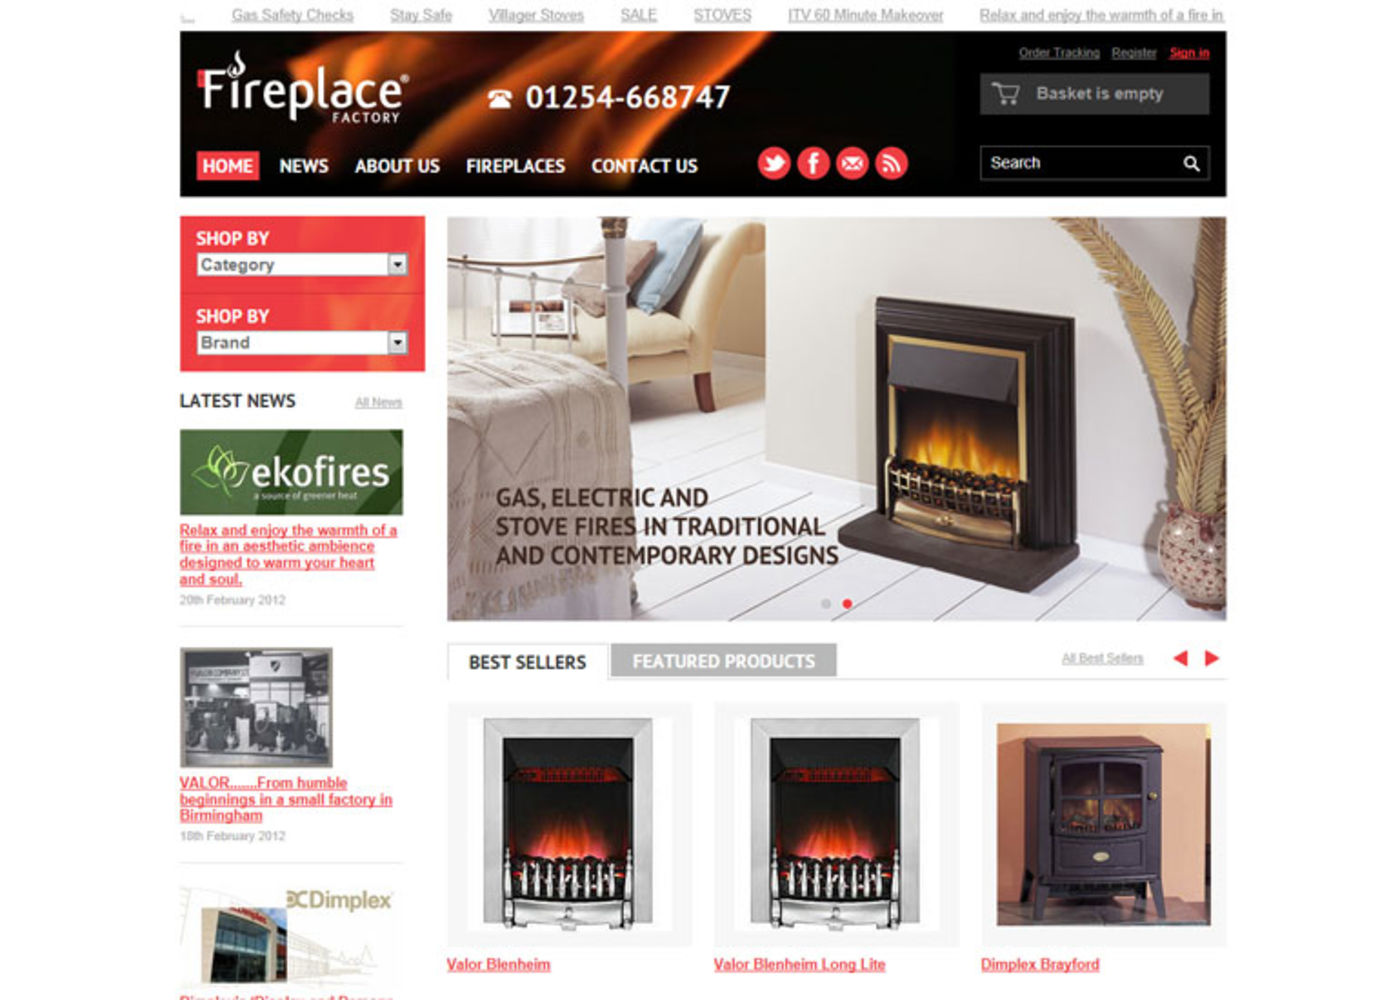 The Fireplace Factory Home page